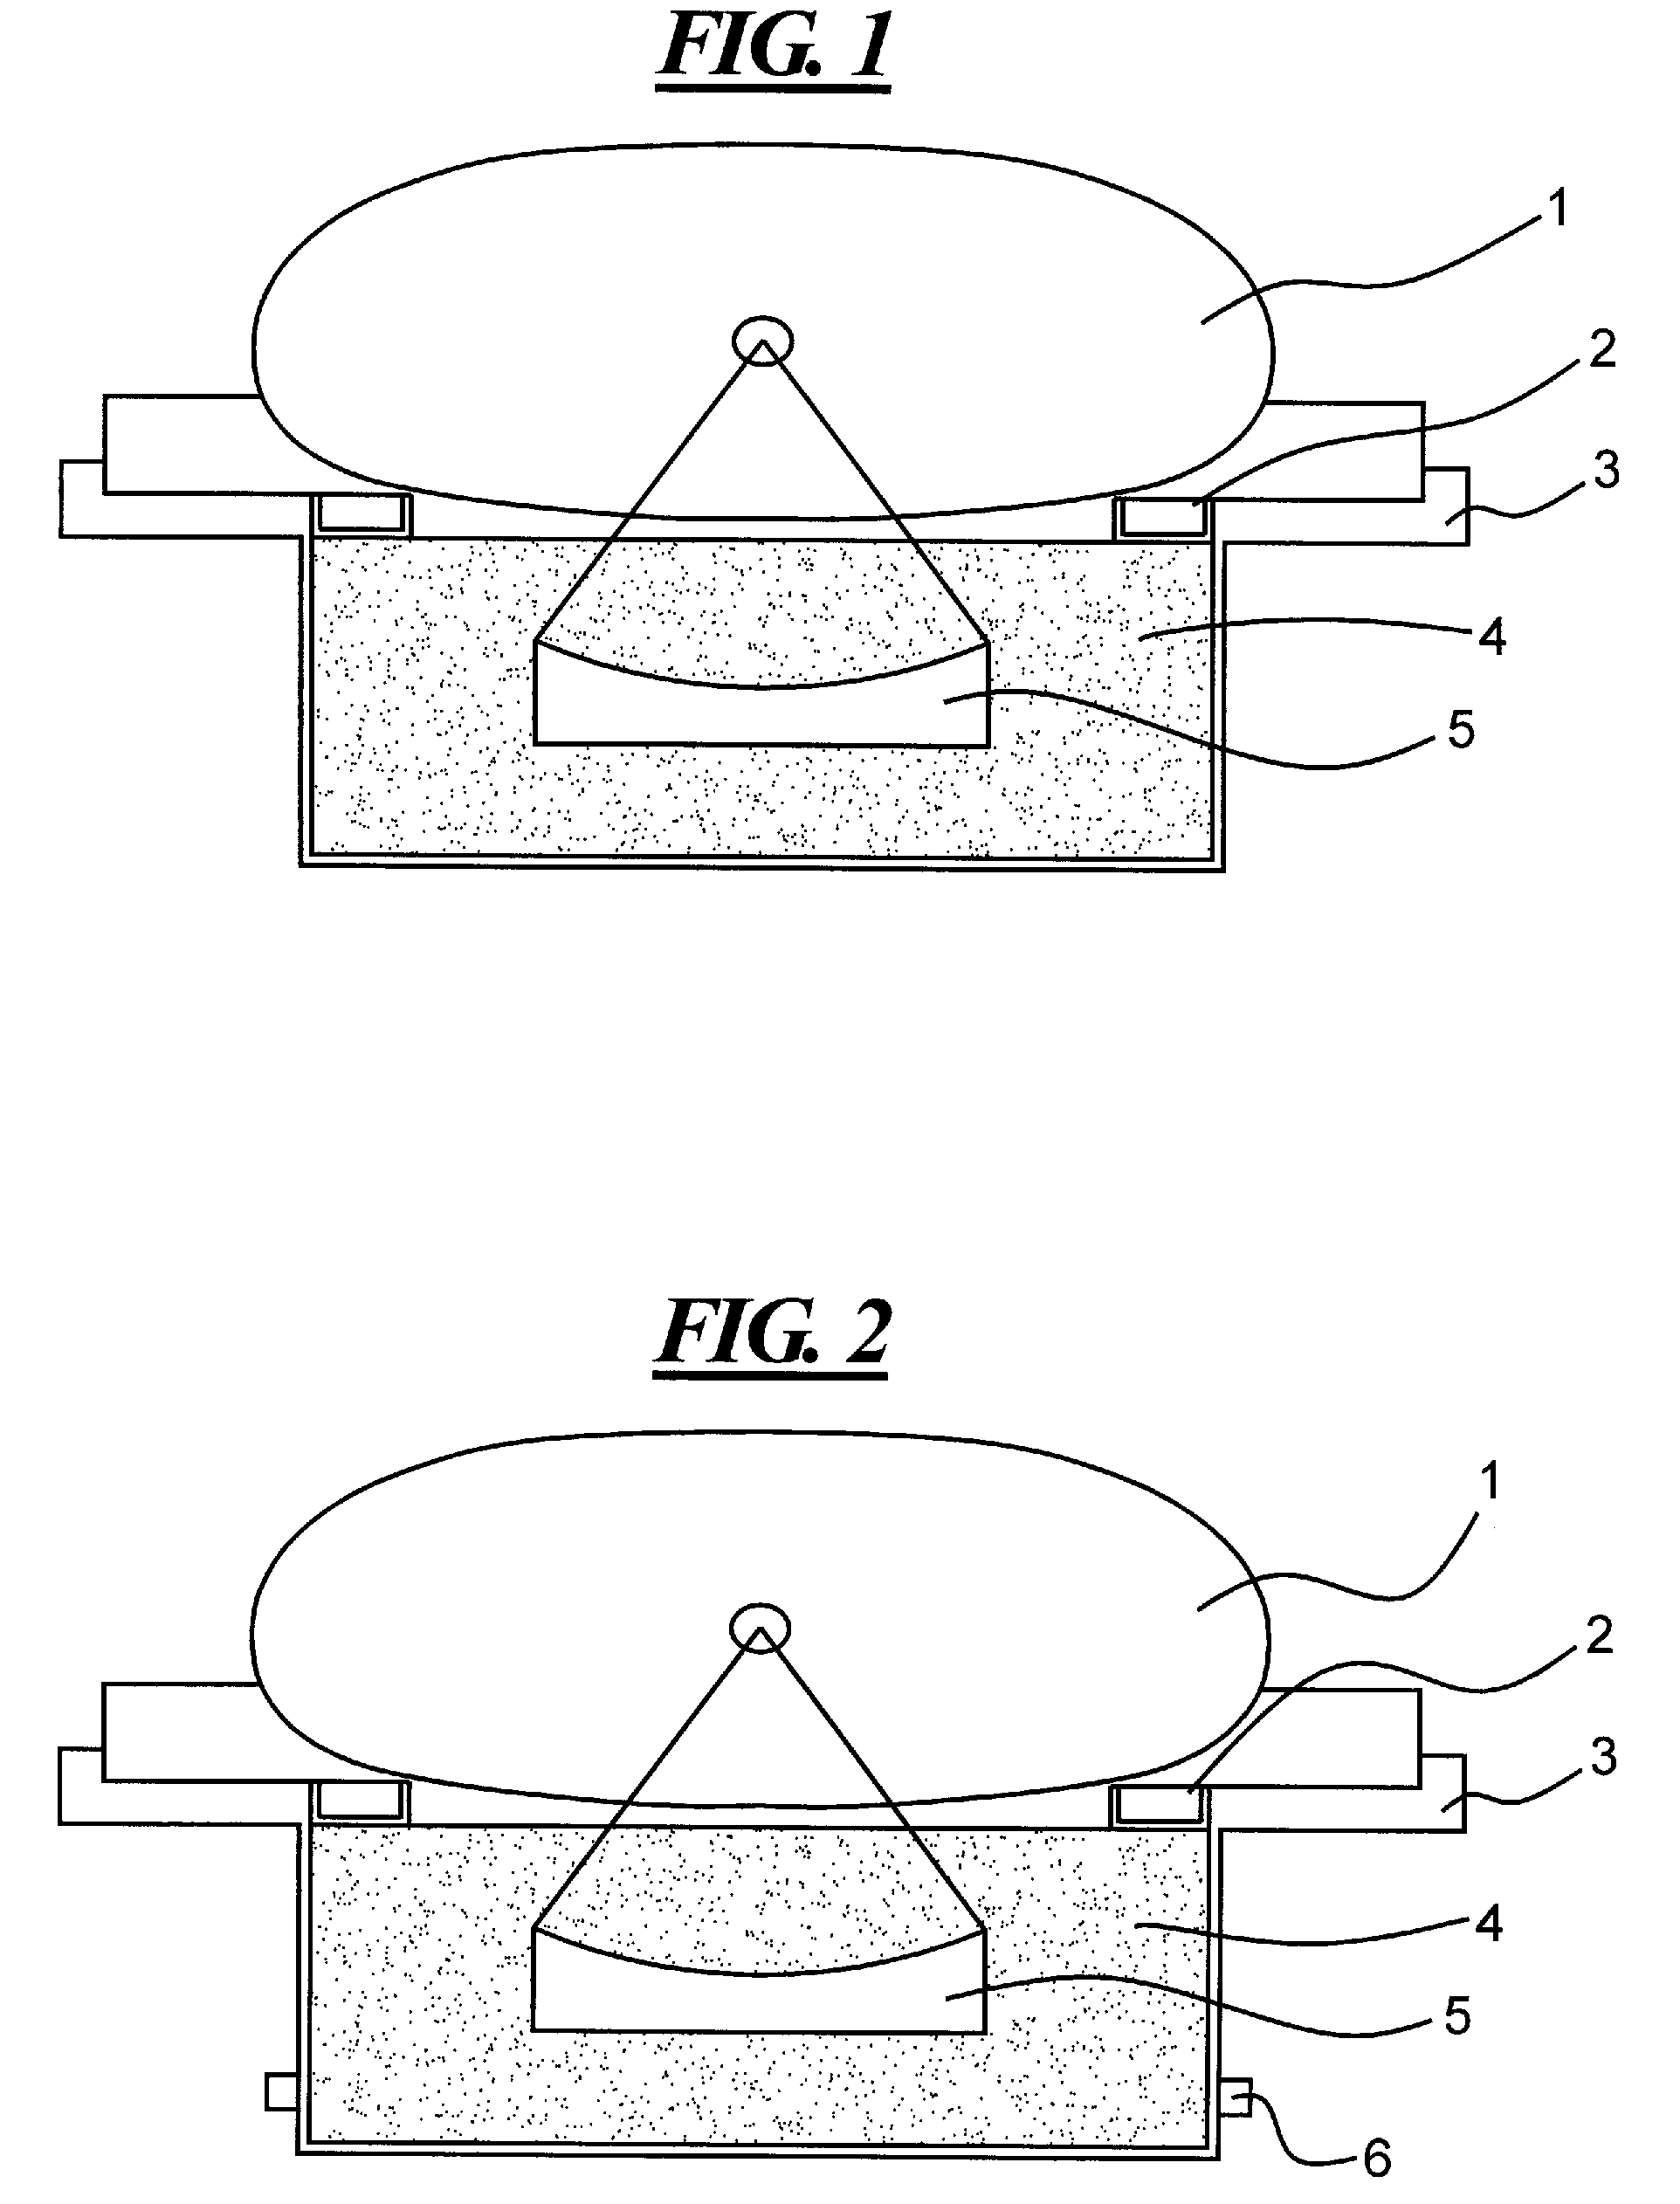 Method and apparatus for reducing aliasing artifacts in the imaging for MR-monitored HIFU therapy